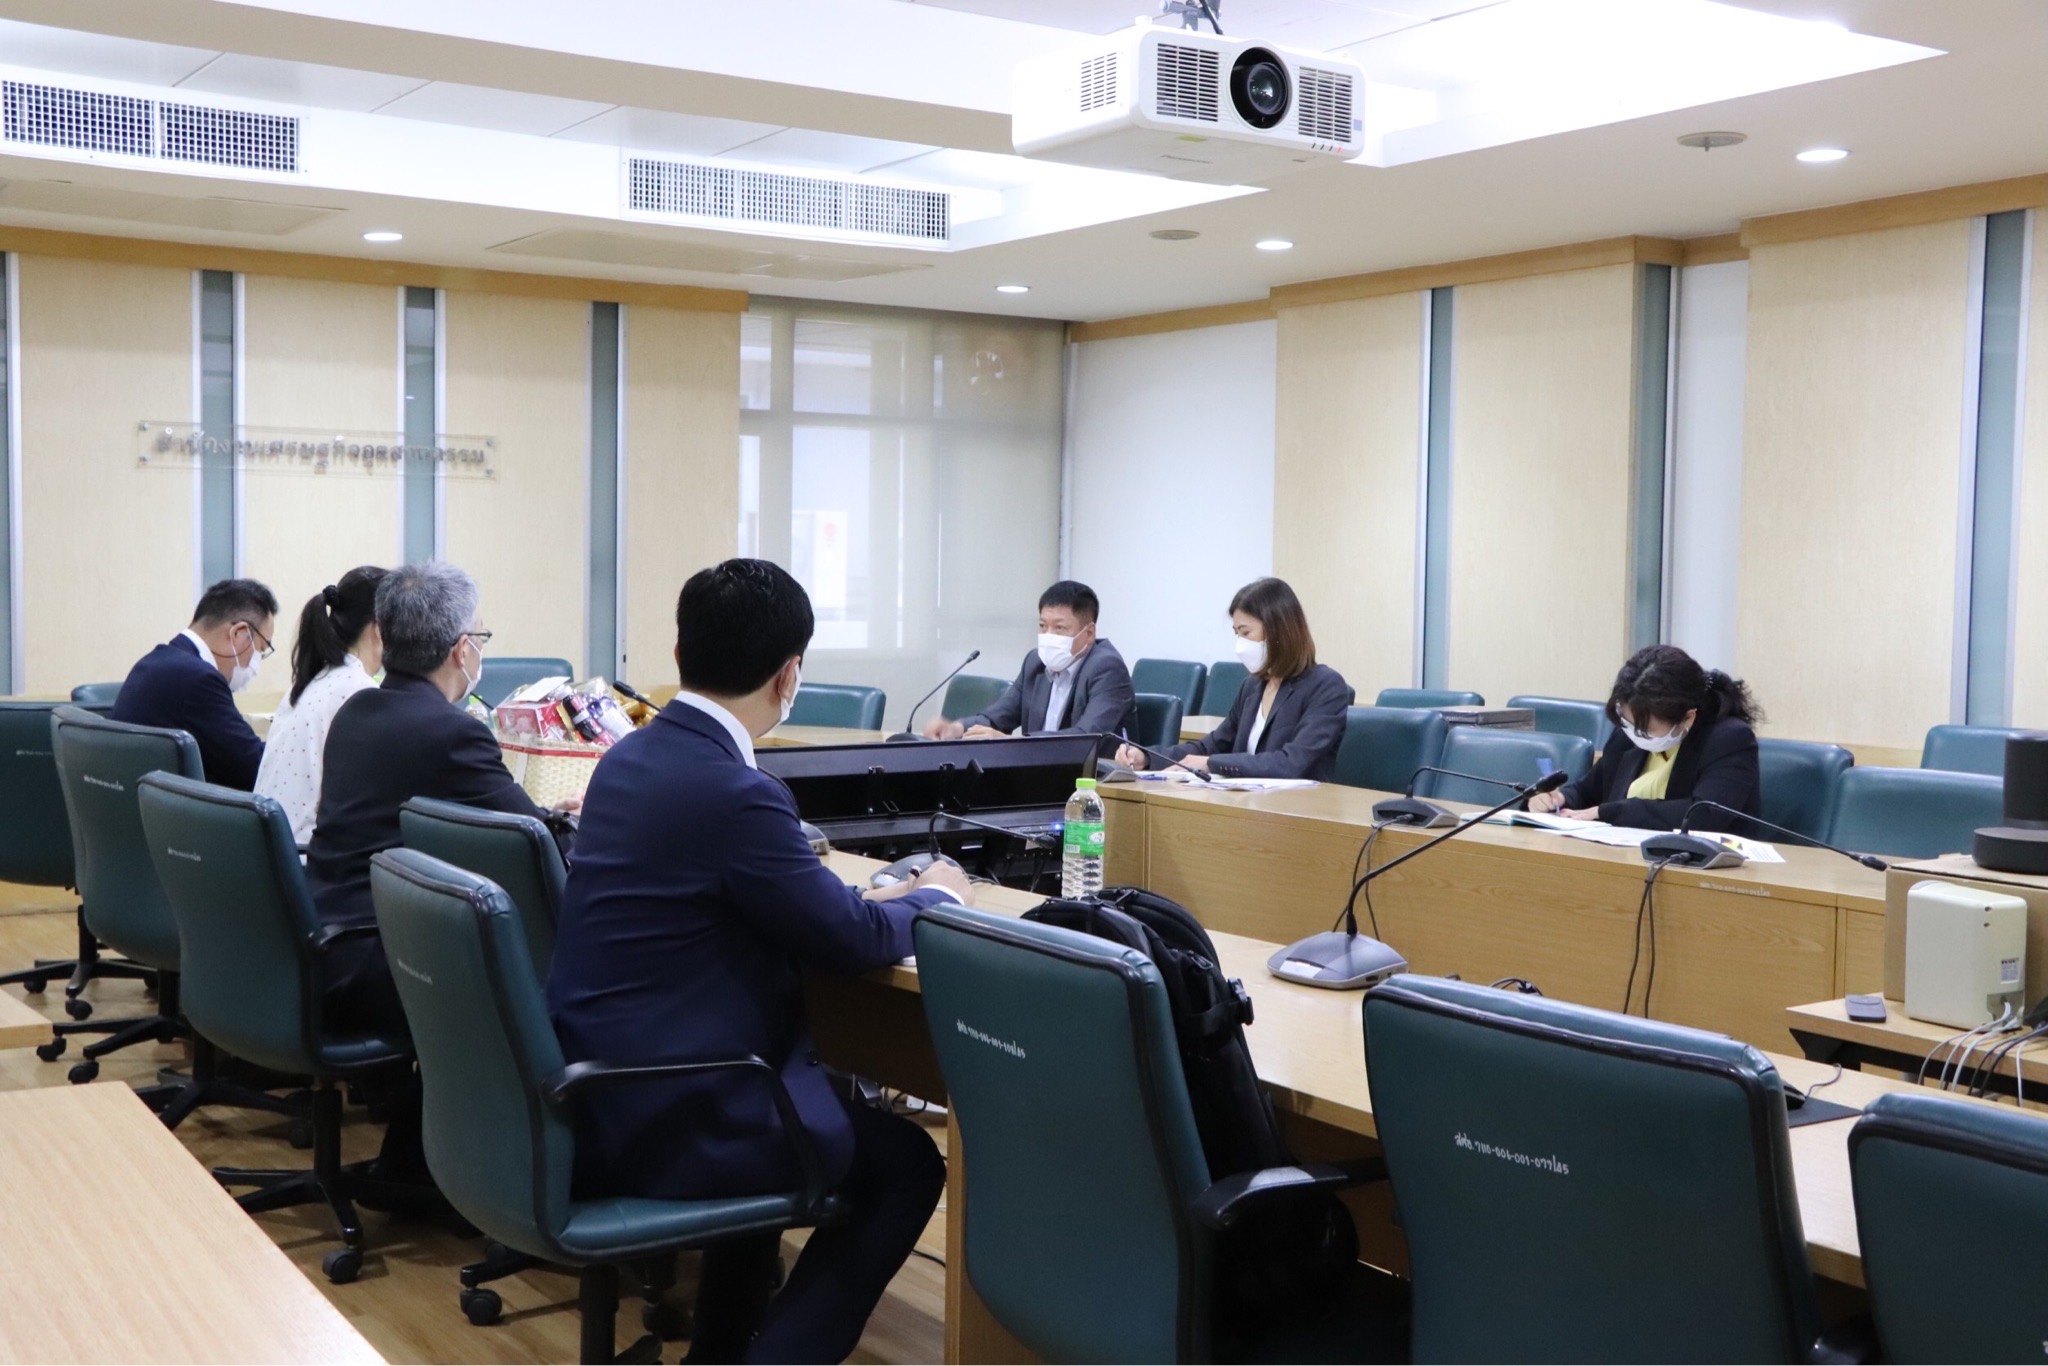 Meeting to Discuss Business Plans and Cooperation in Steel Industry Development